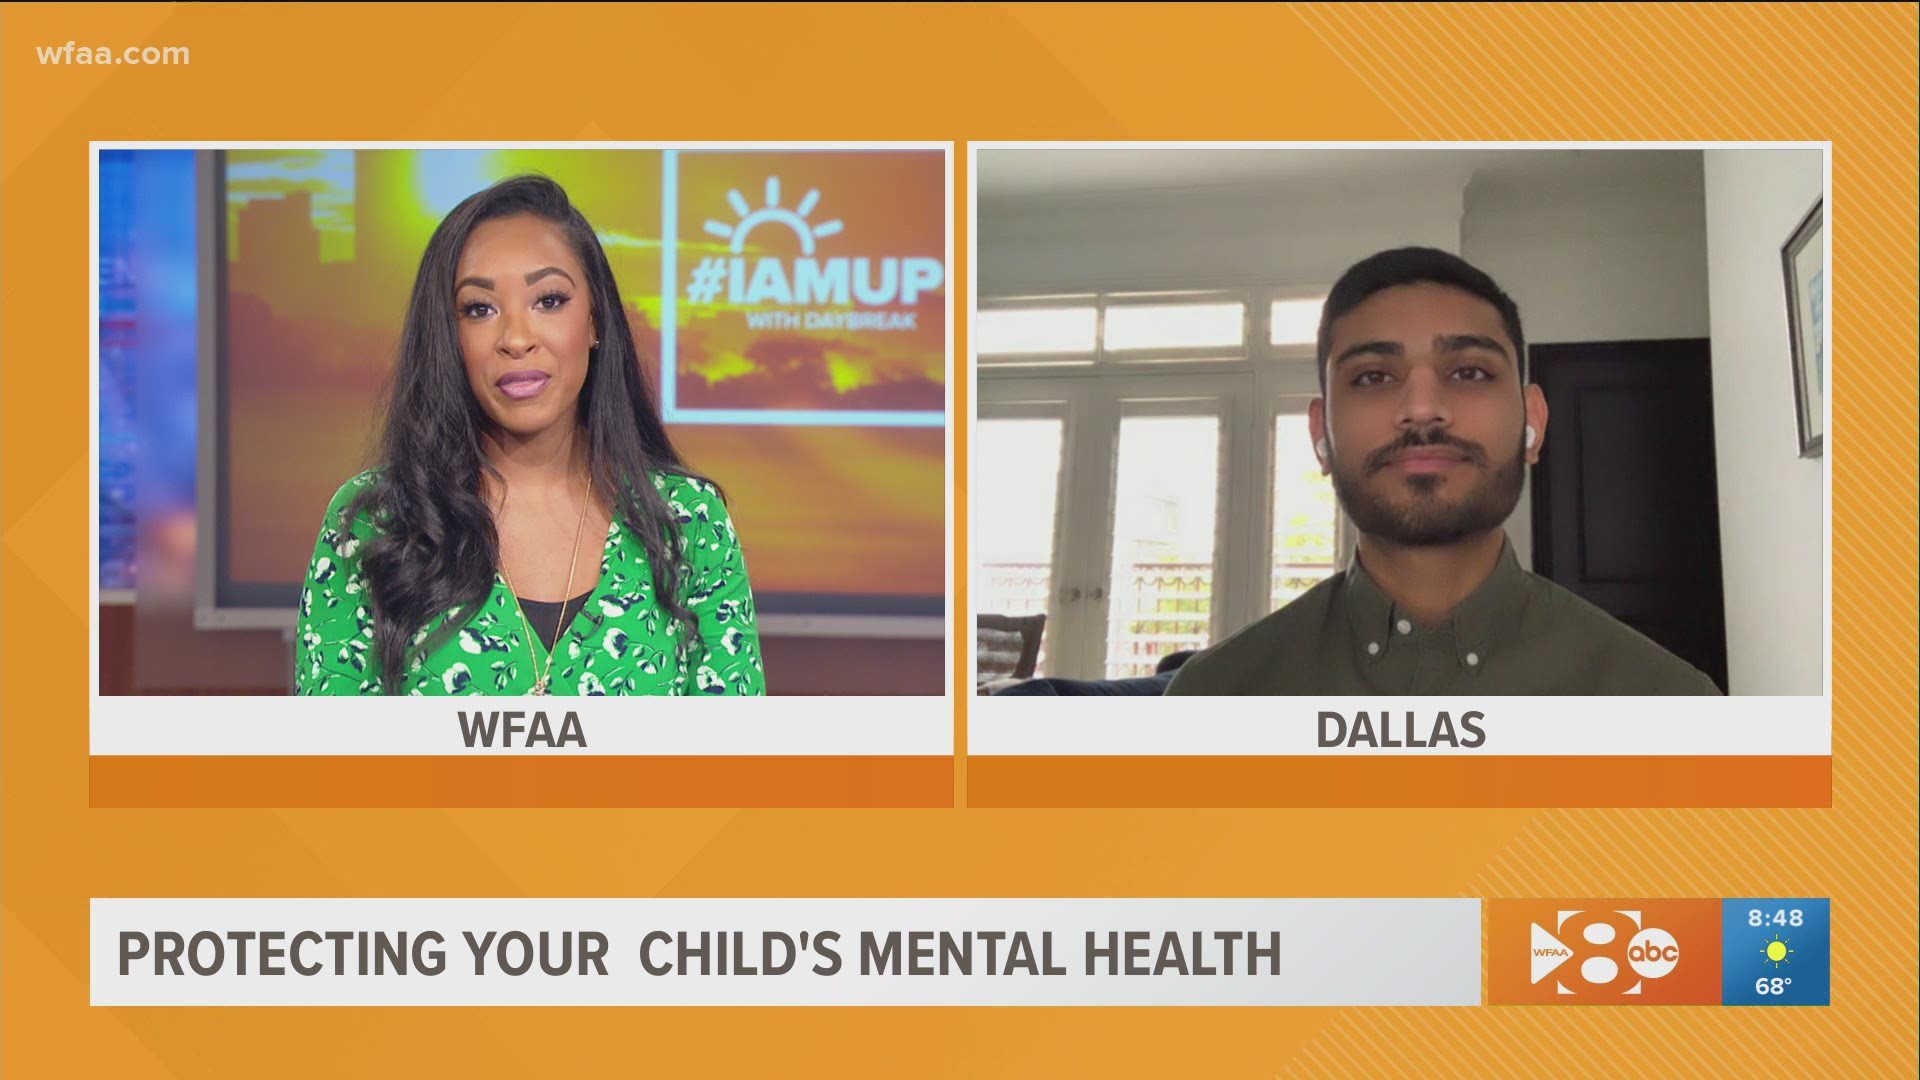 Hasan Tinwala with Teach for America joined WFAA to share tips about how to help kids manage their mental health and build relationships and emotional understanding.